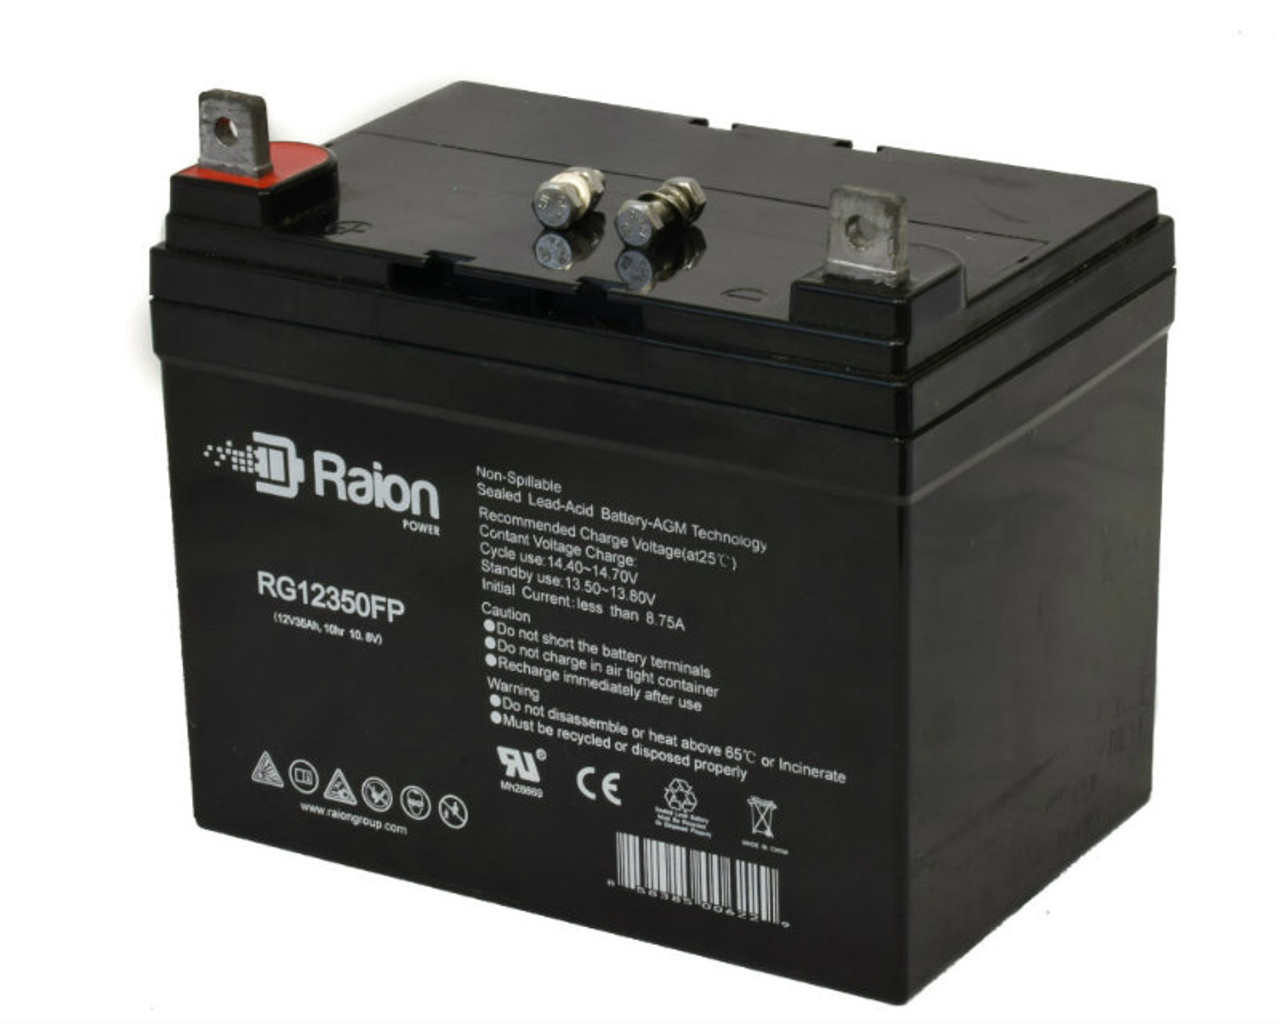 Raion Power Replacement 12V 35Ah RG12350FP Battery for Dixon 7025